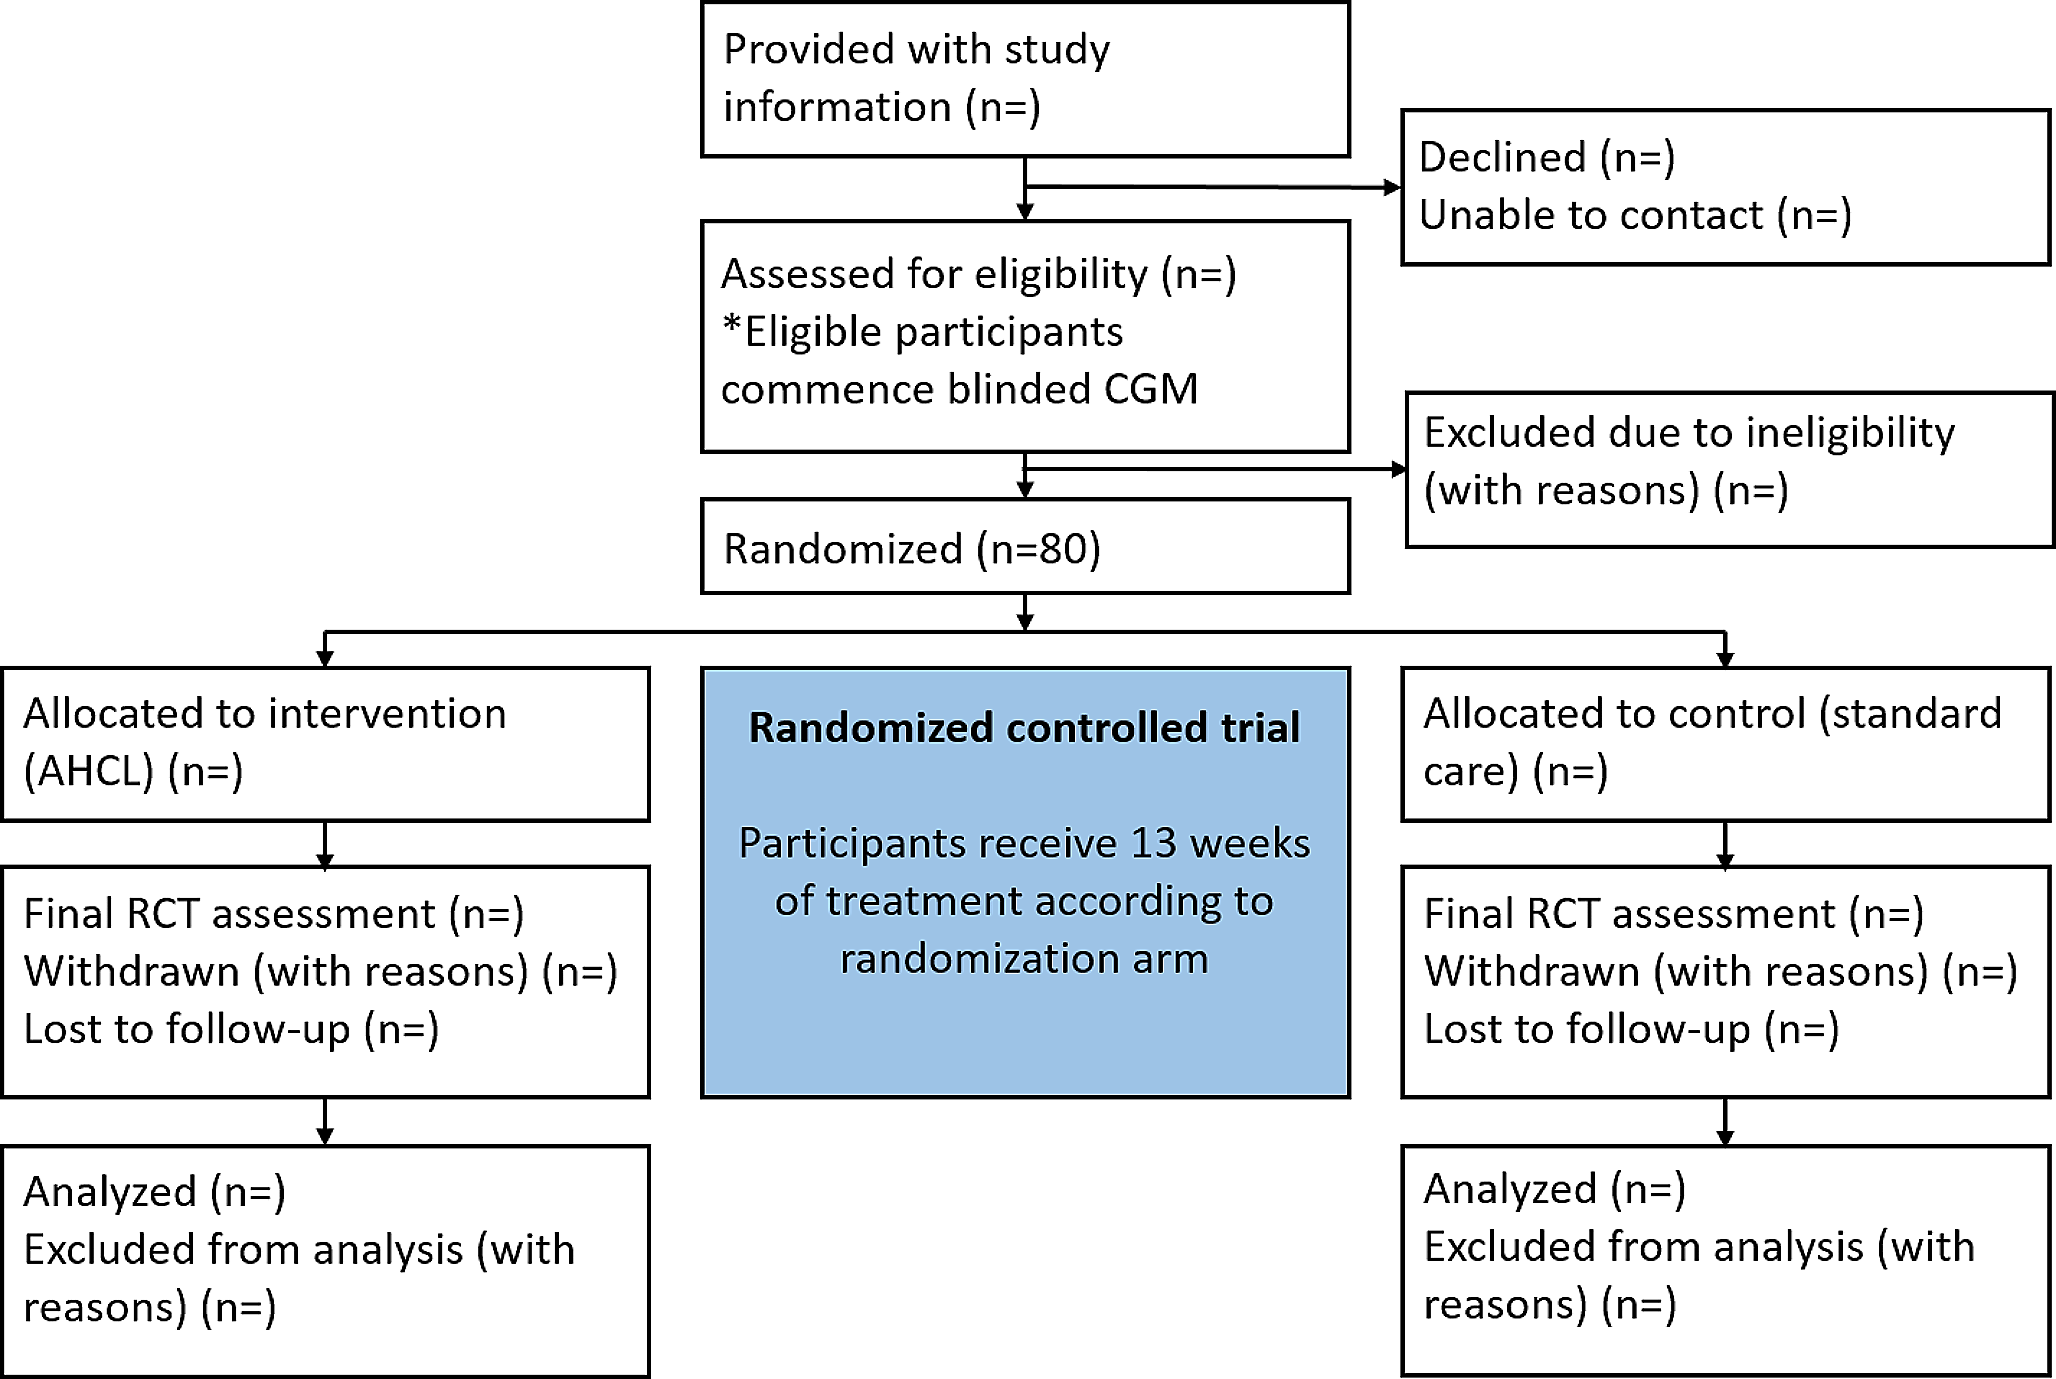 Protocol for a prospective, multicenter, parallel-group, open-label randomized controlled trial comparing standard care with Closed lOoP In chiLdren and yOuth with Type 1 diabetes and high-risk glycemic control: the CO-PILOT trial